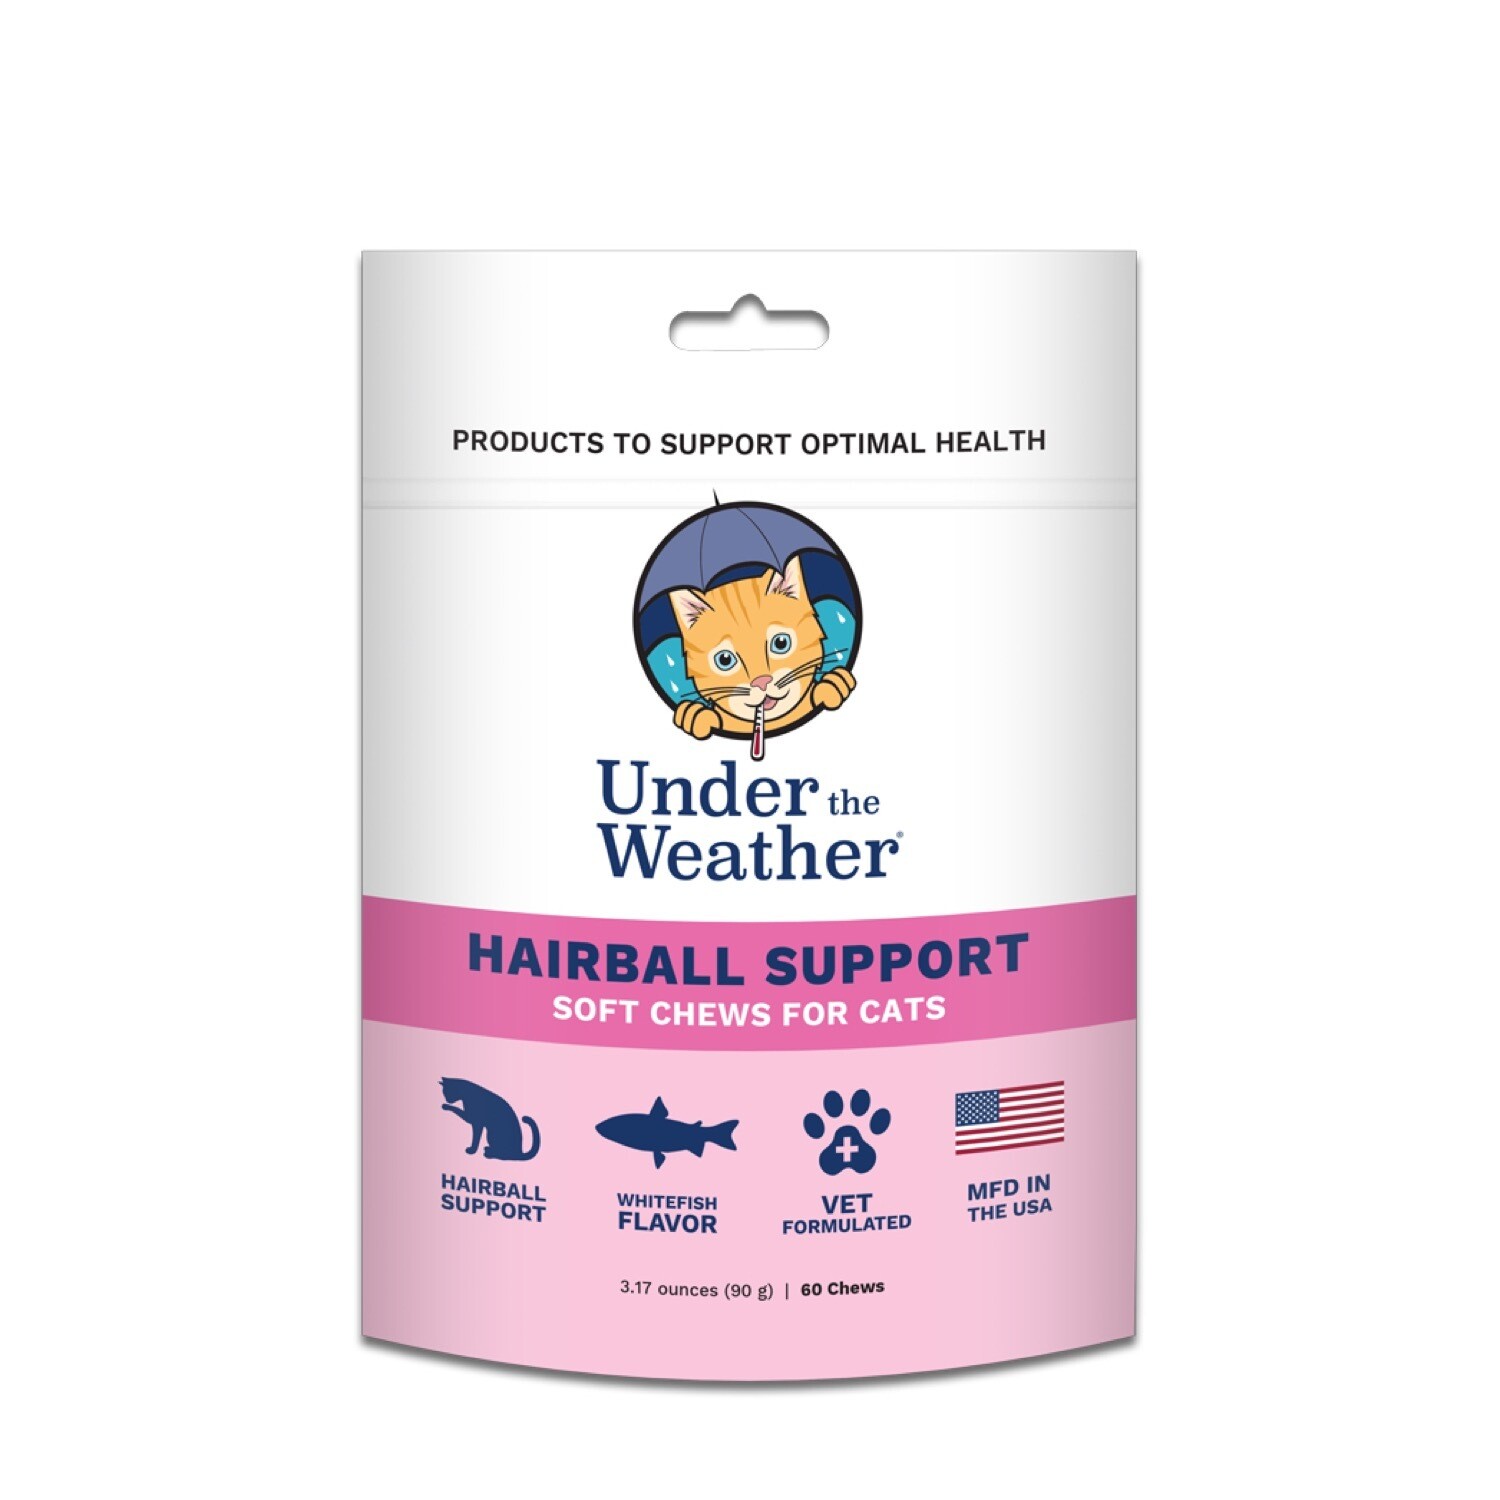 Under the Weather Hairball Support Soft Chews for Cats 90g